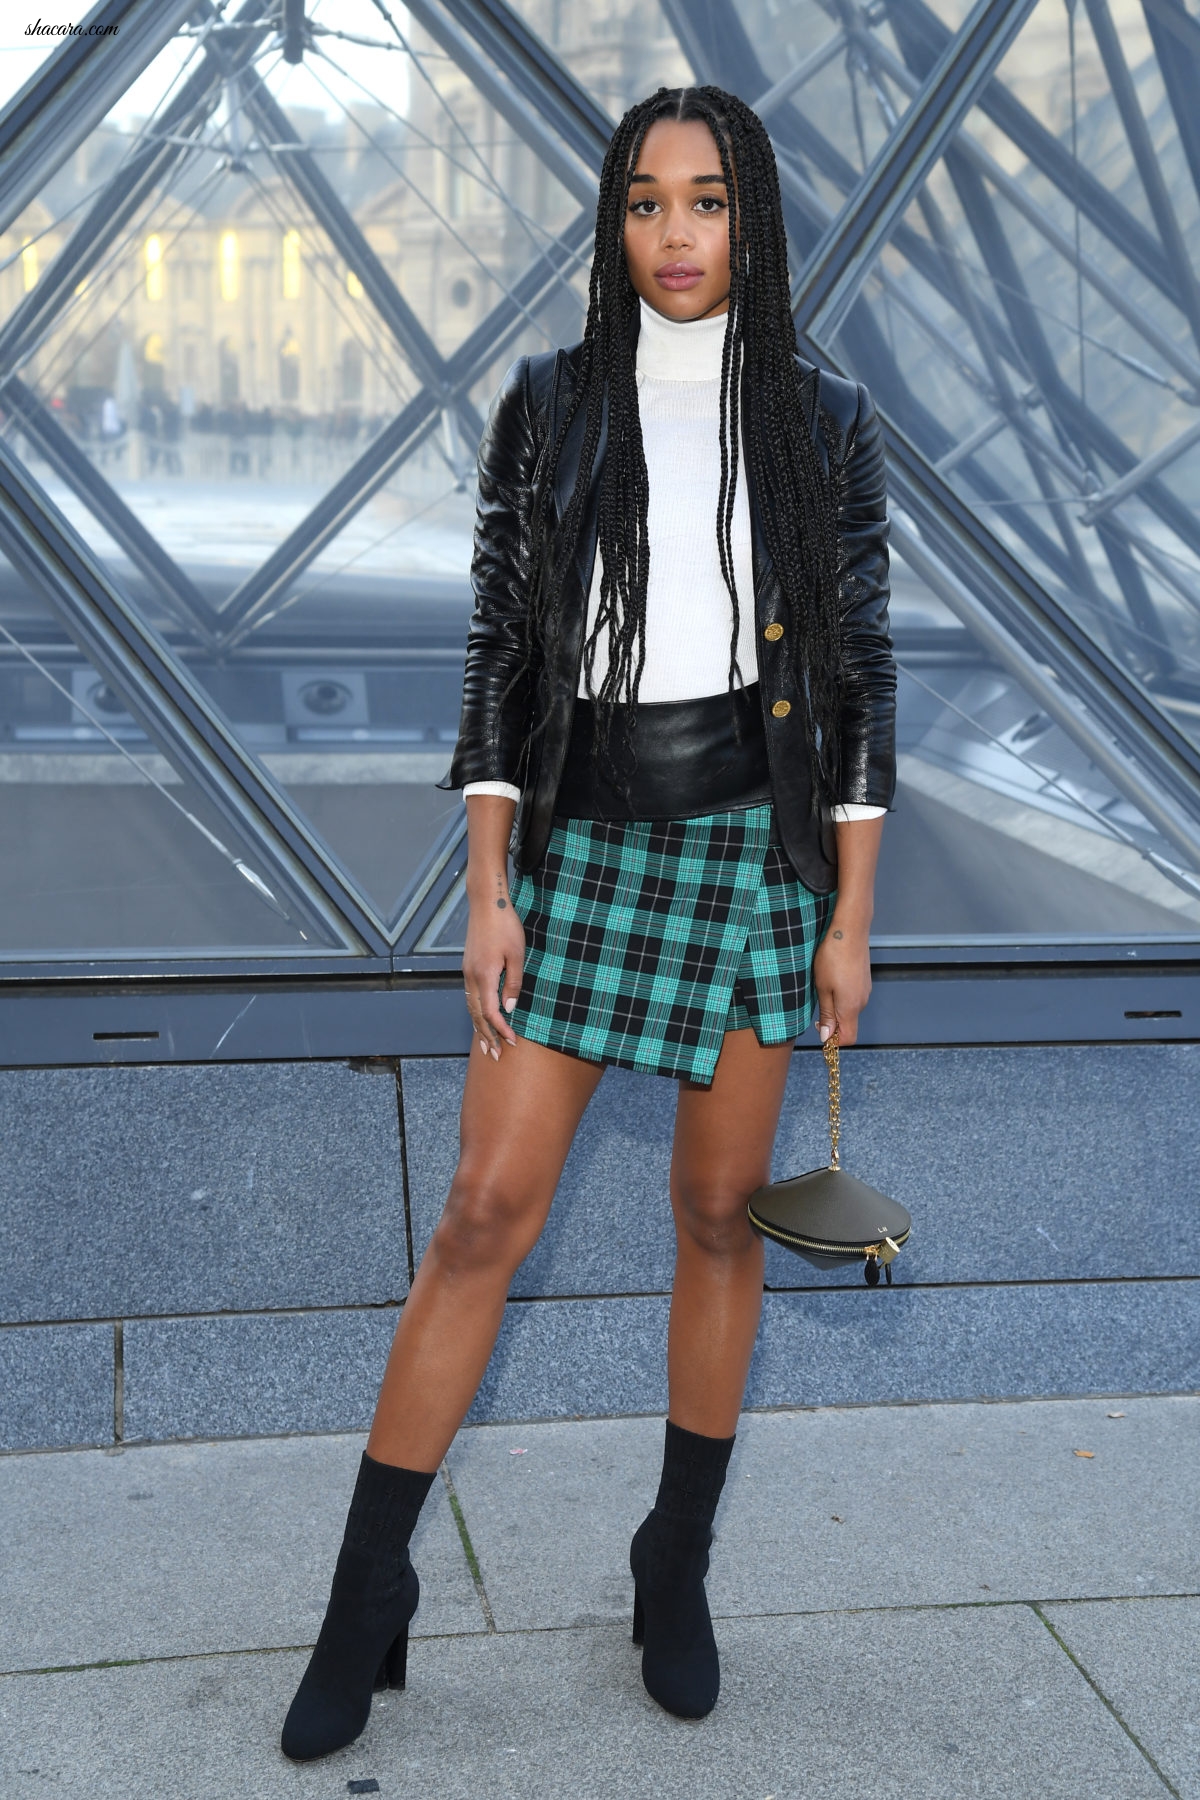 Willow Smith, Janelle Monae, Samuel L. Jackson And More Celebs Out And About